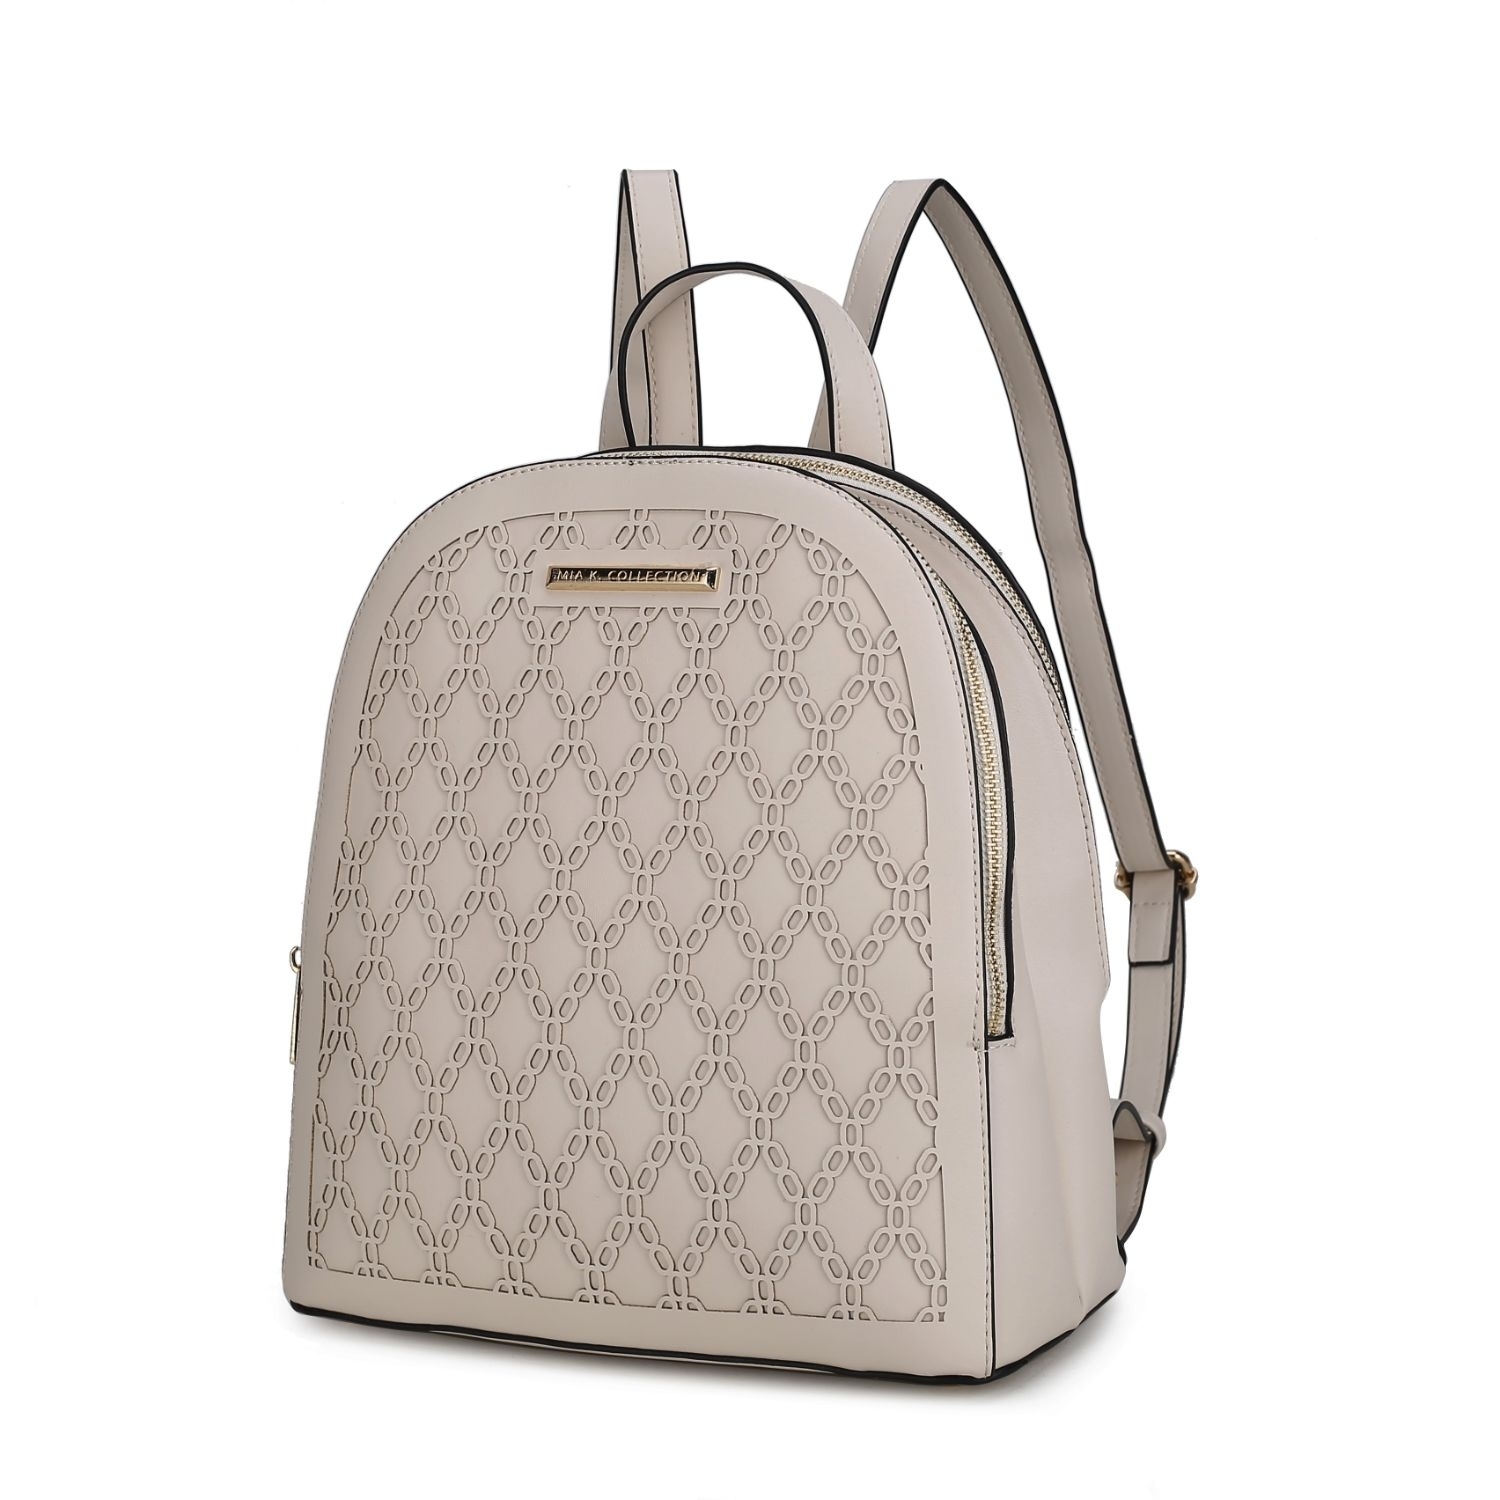 MKF Collection Sloane Vegan Leather Multi Compartment Backpack By Mia K. - Chocolate